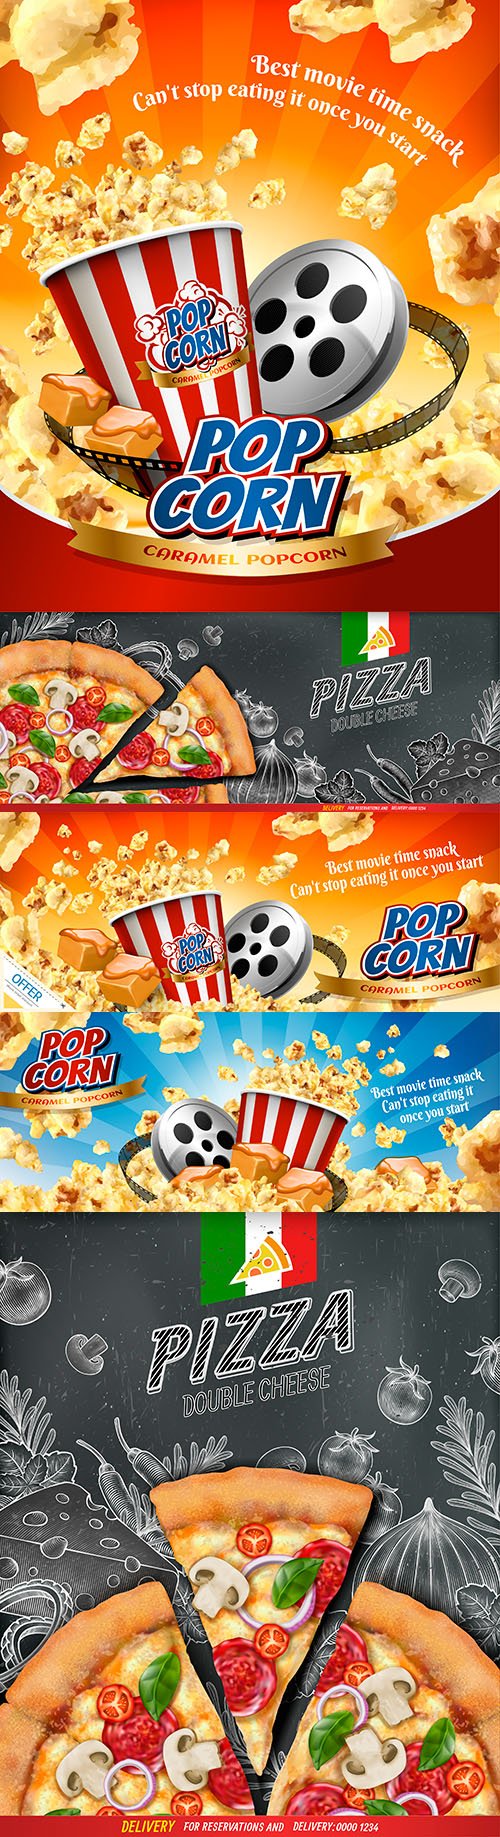 Poster with popcorn and pizza banner food advertisement